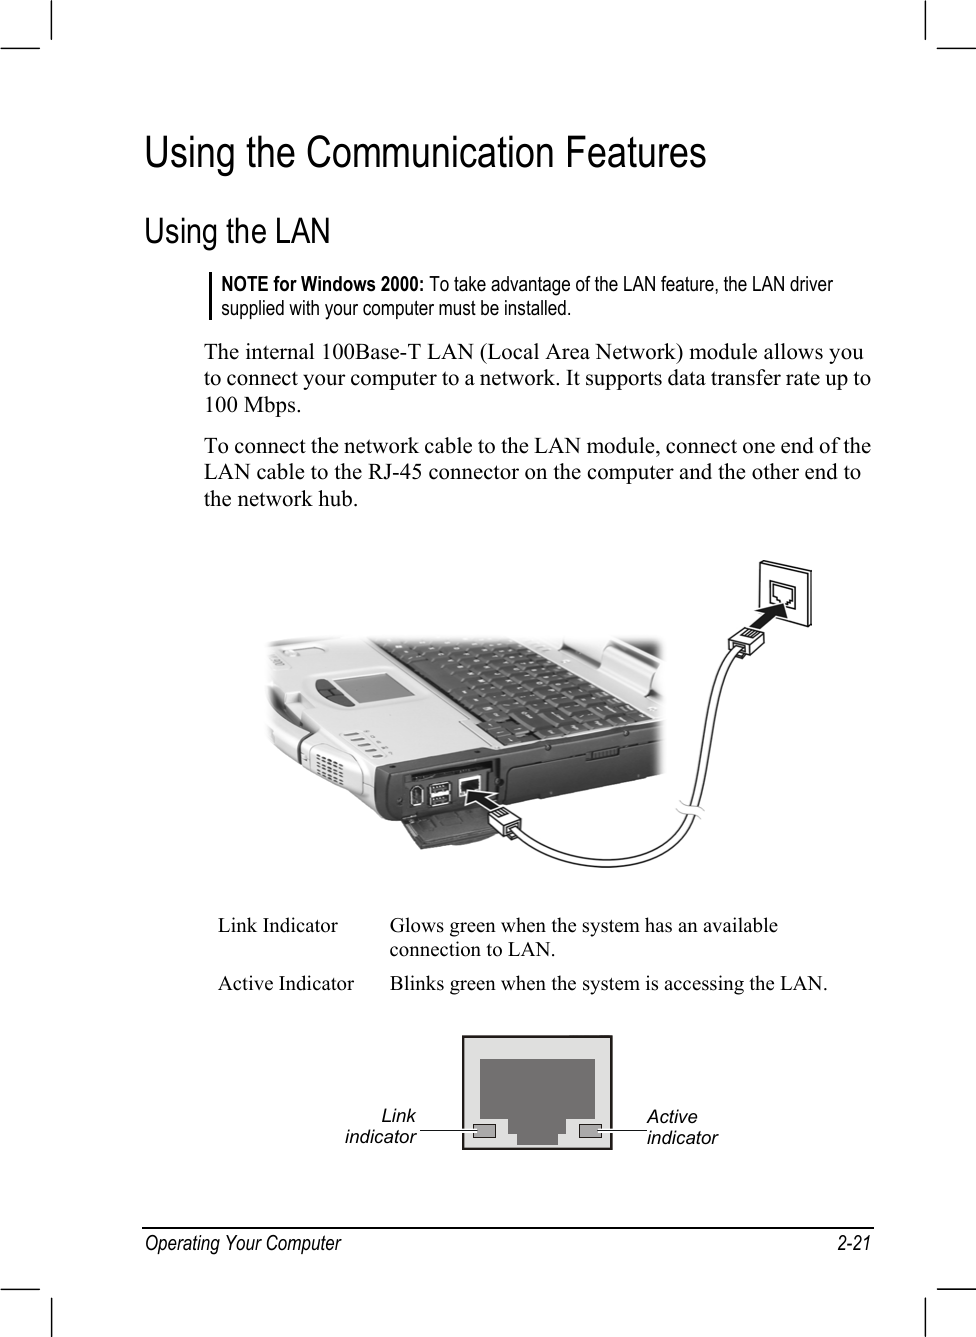 Operating Your Computer 2-21Using the Communication FeaturesUsing the LANNOTE for Windows 2000: To take advantage of the LAN feature, the LAN driversupplied with your computer must be installed.The internal 100Base-T LAN (Local Area Network) module allows youto connect your computer to a network. It supports data transfer rate up to100 Mbps.To connect the network cable to the LAN module, connect one end of theLAN cable to the RJ-45 connector on the computer and the other end tothe network hub.Link Indicator Glows green when the system has an availableconnection to LAN.Active Indicator Blinks green when the system is accessing the LAN.ActiveindicatorLinkindicator